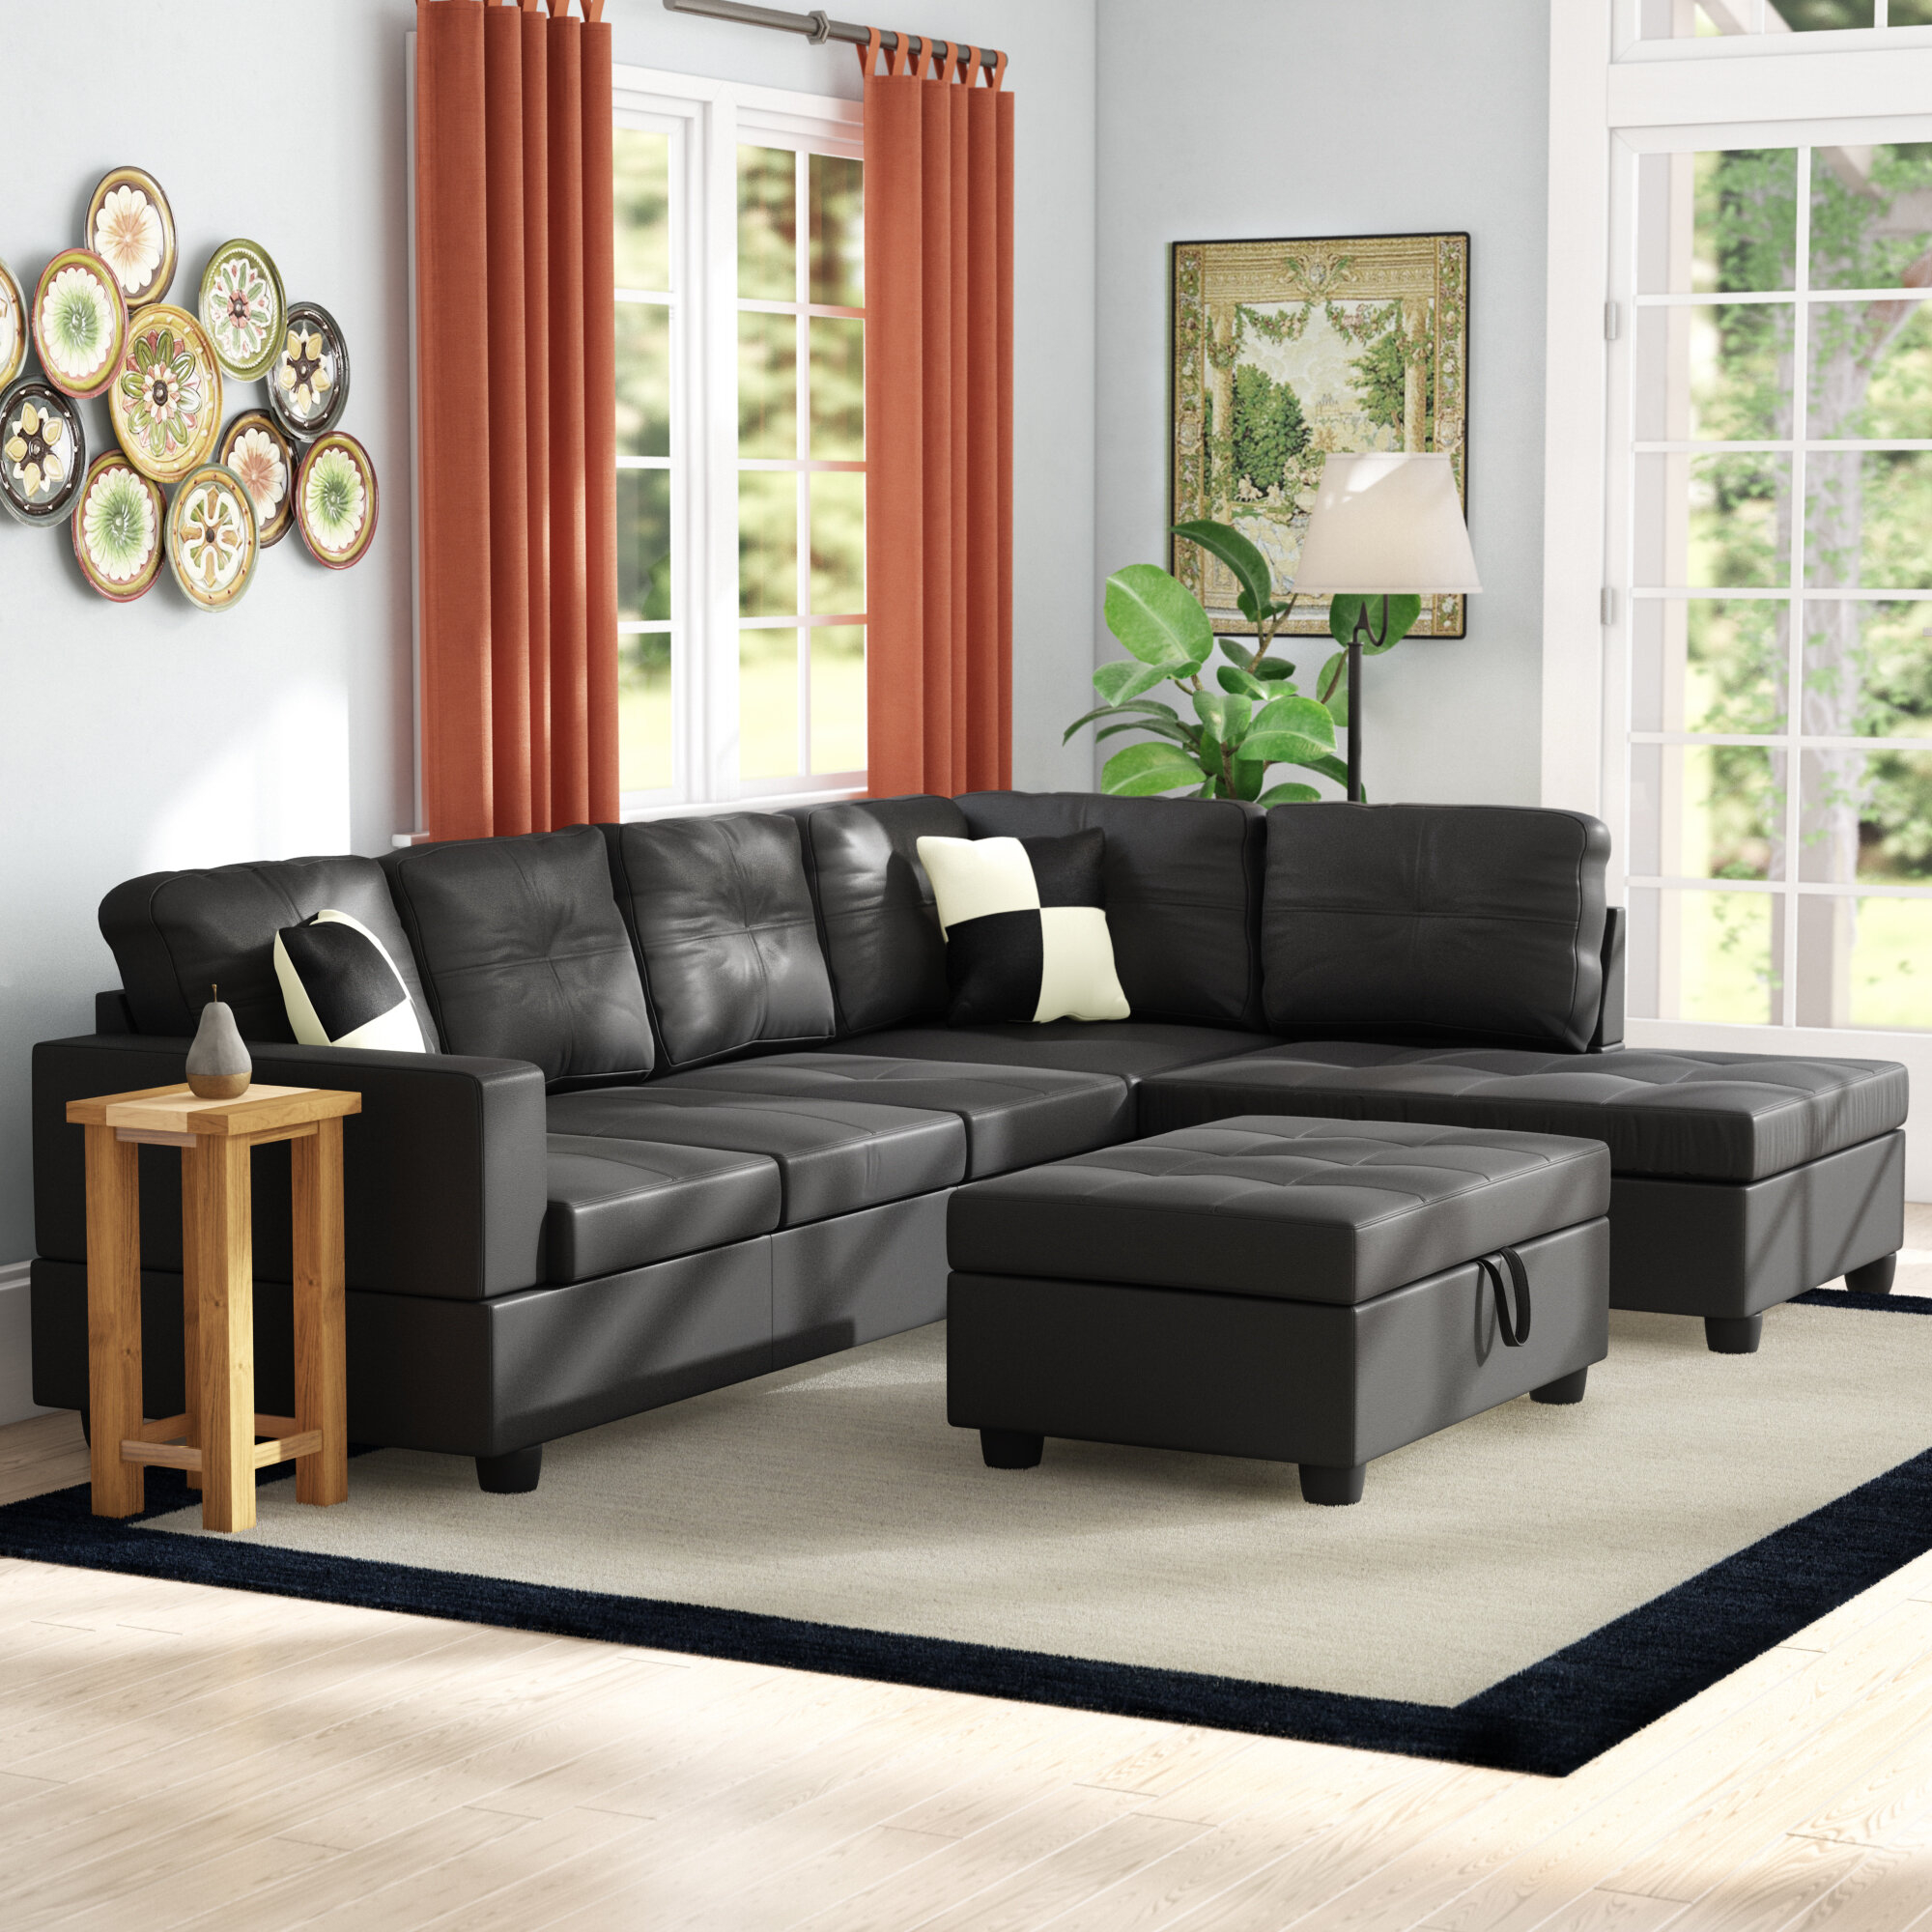 Small Leather Sectional Visualhunt, Leather Sectional Couches For Small Spaces